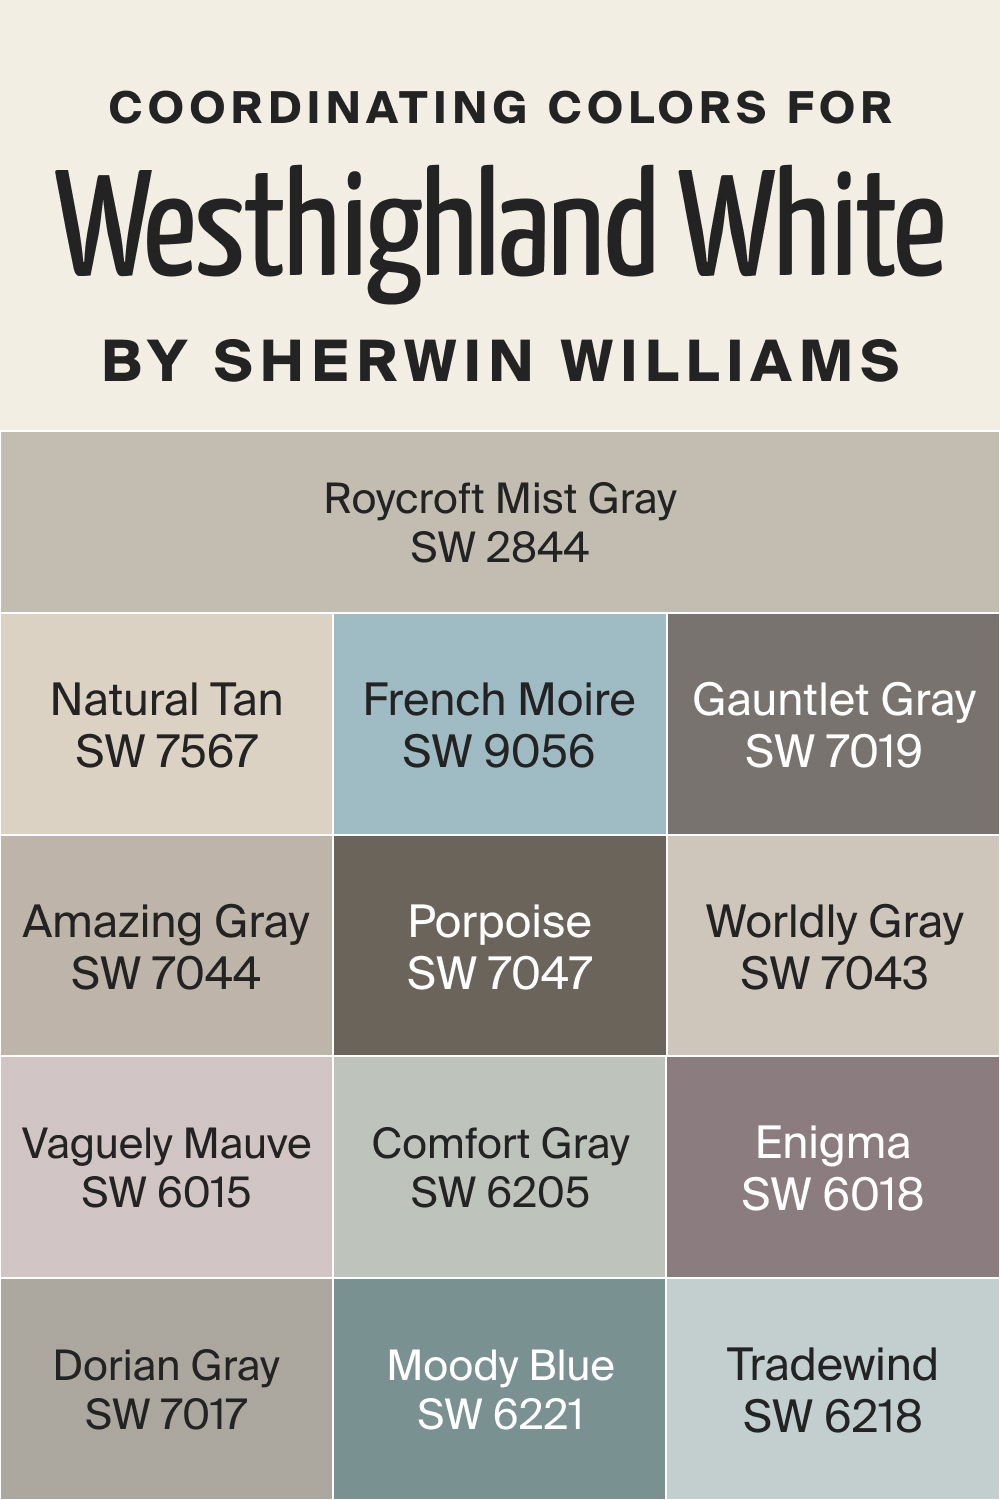 Coordinating Colors for Westhighland White SW 7566 by Sherwin Williams